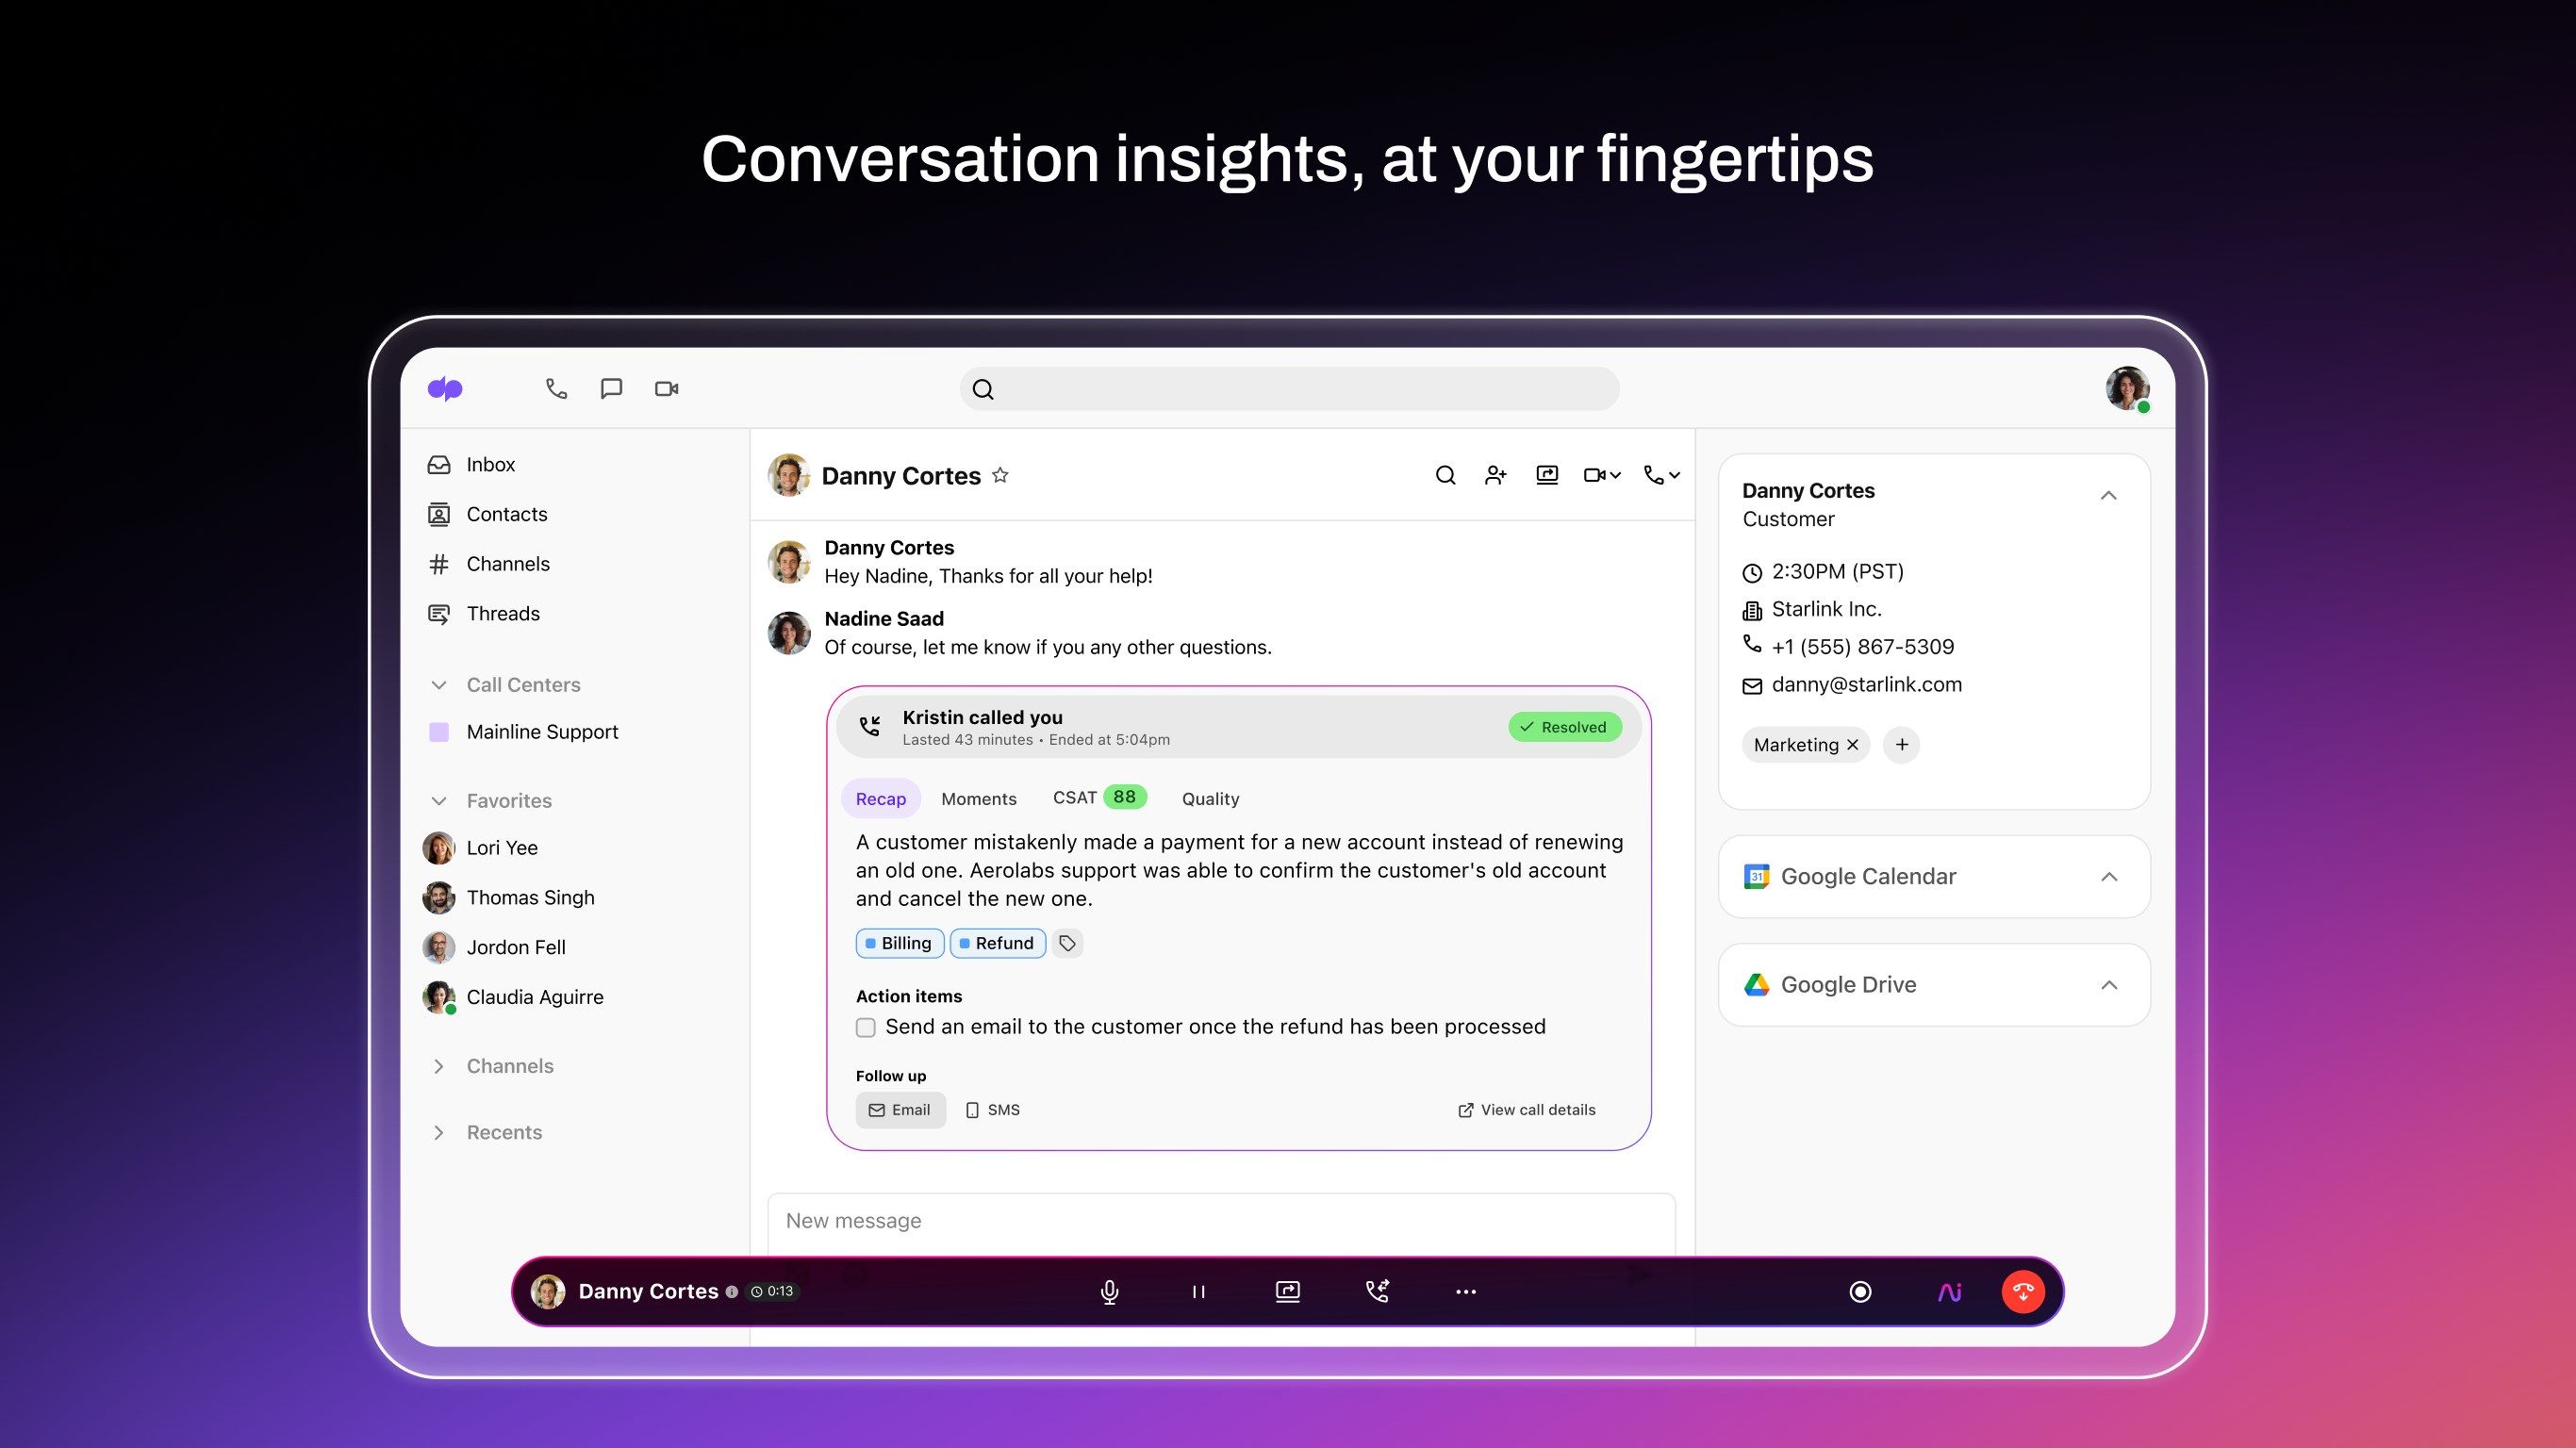 Conversation insights, at your fingertips